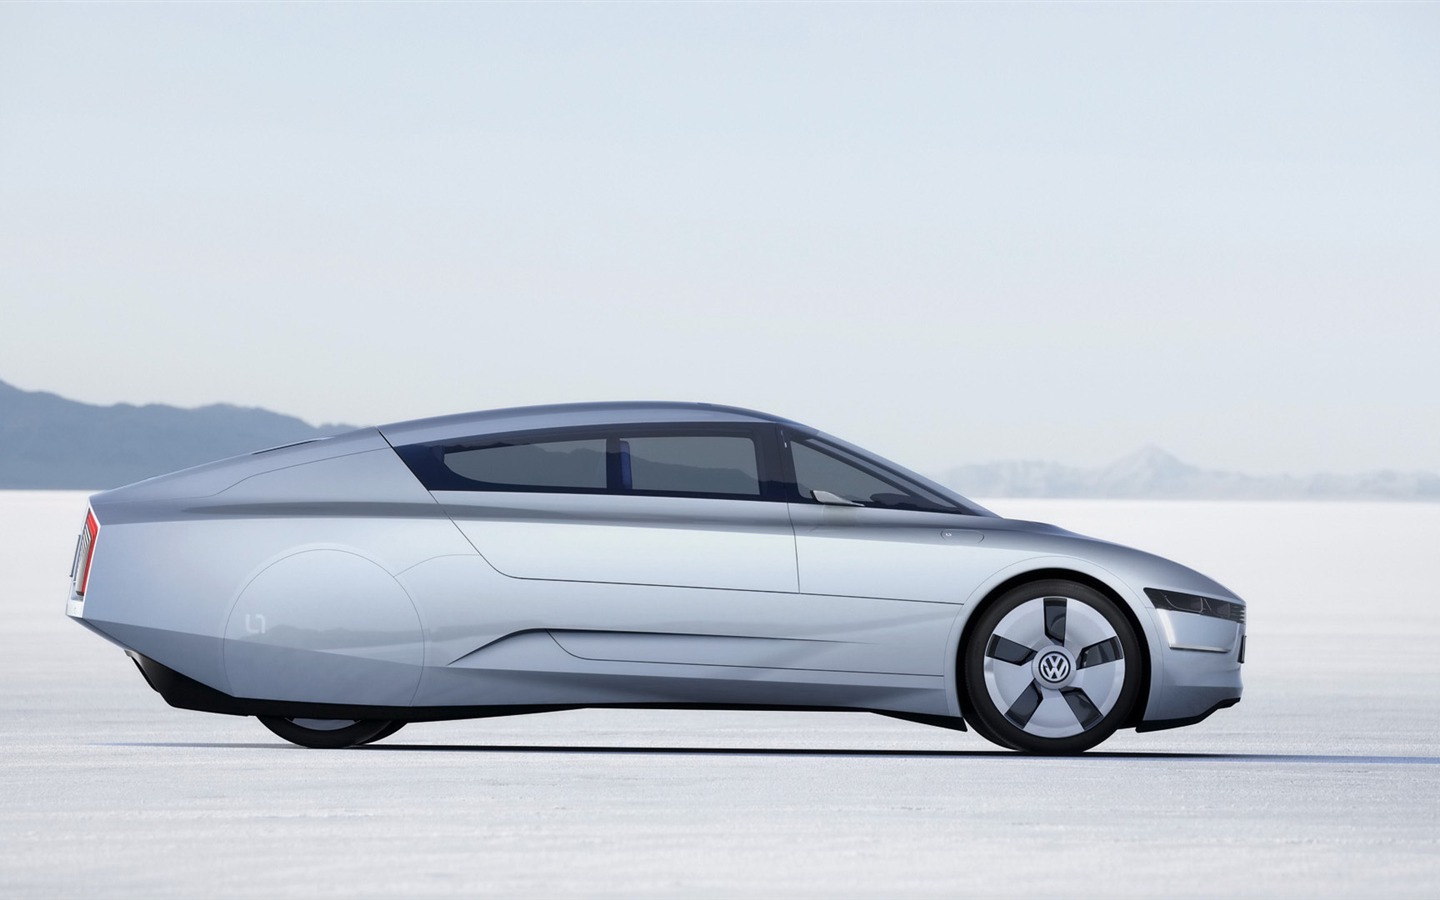 Volkswagen L1 Tapety Concept Car #18 - 1440x900